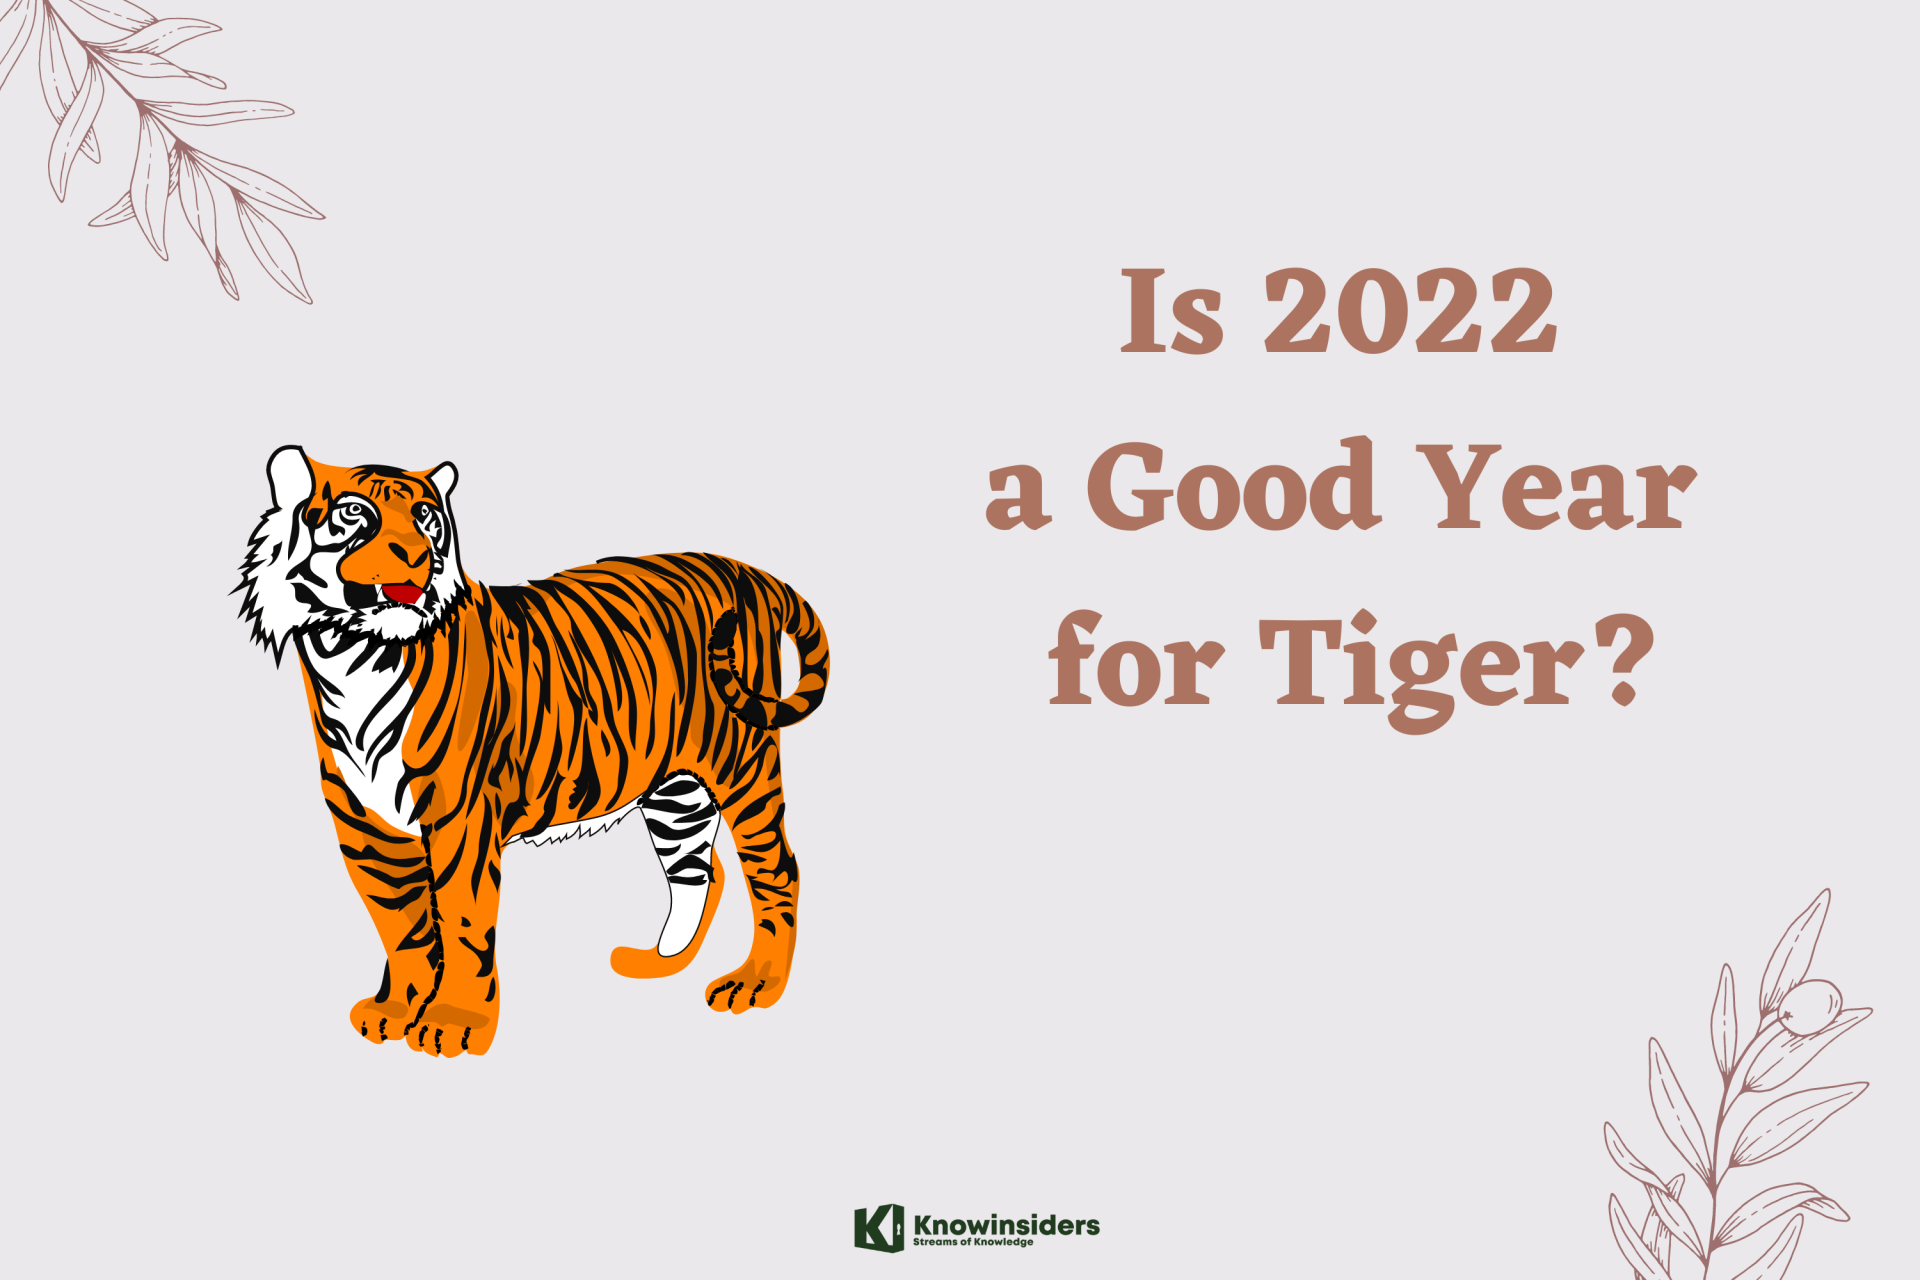 Is 2022 a Good Year for Tiger?